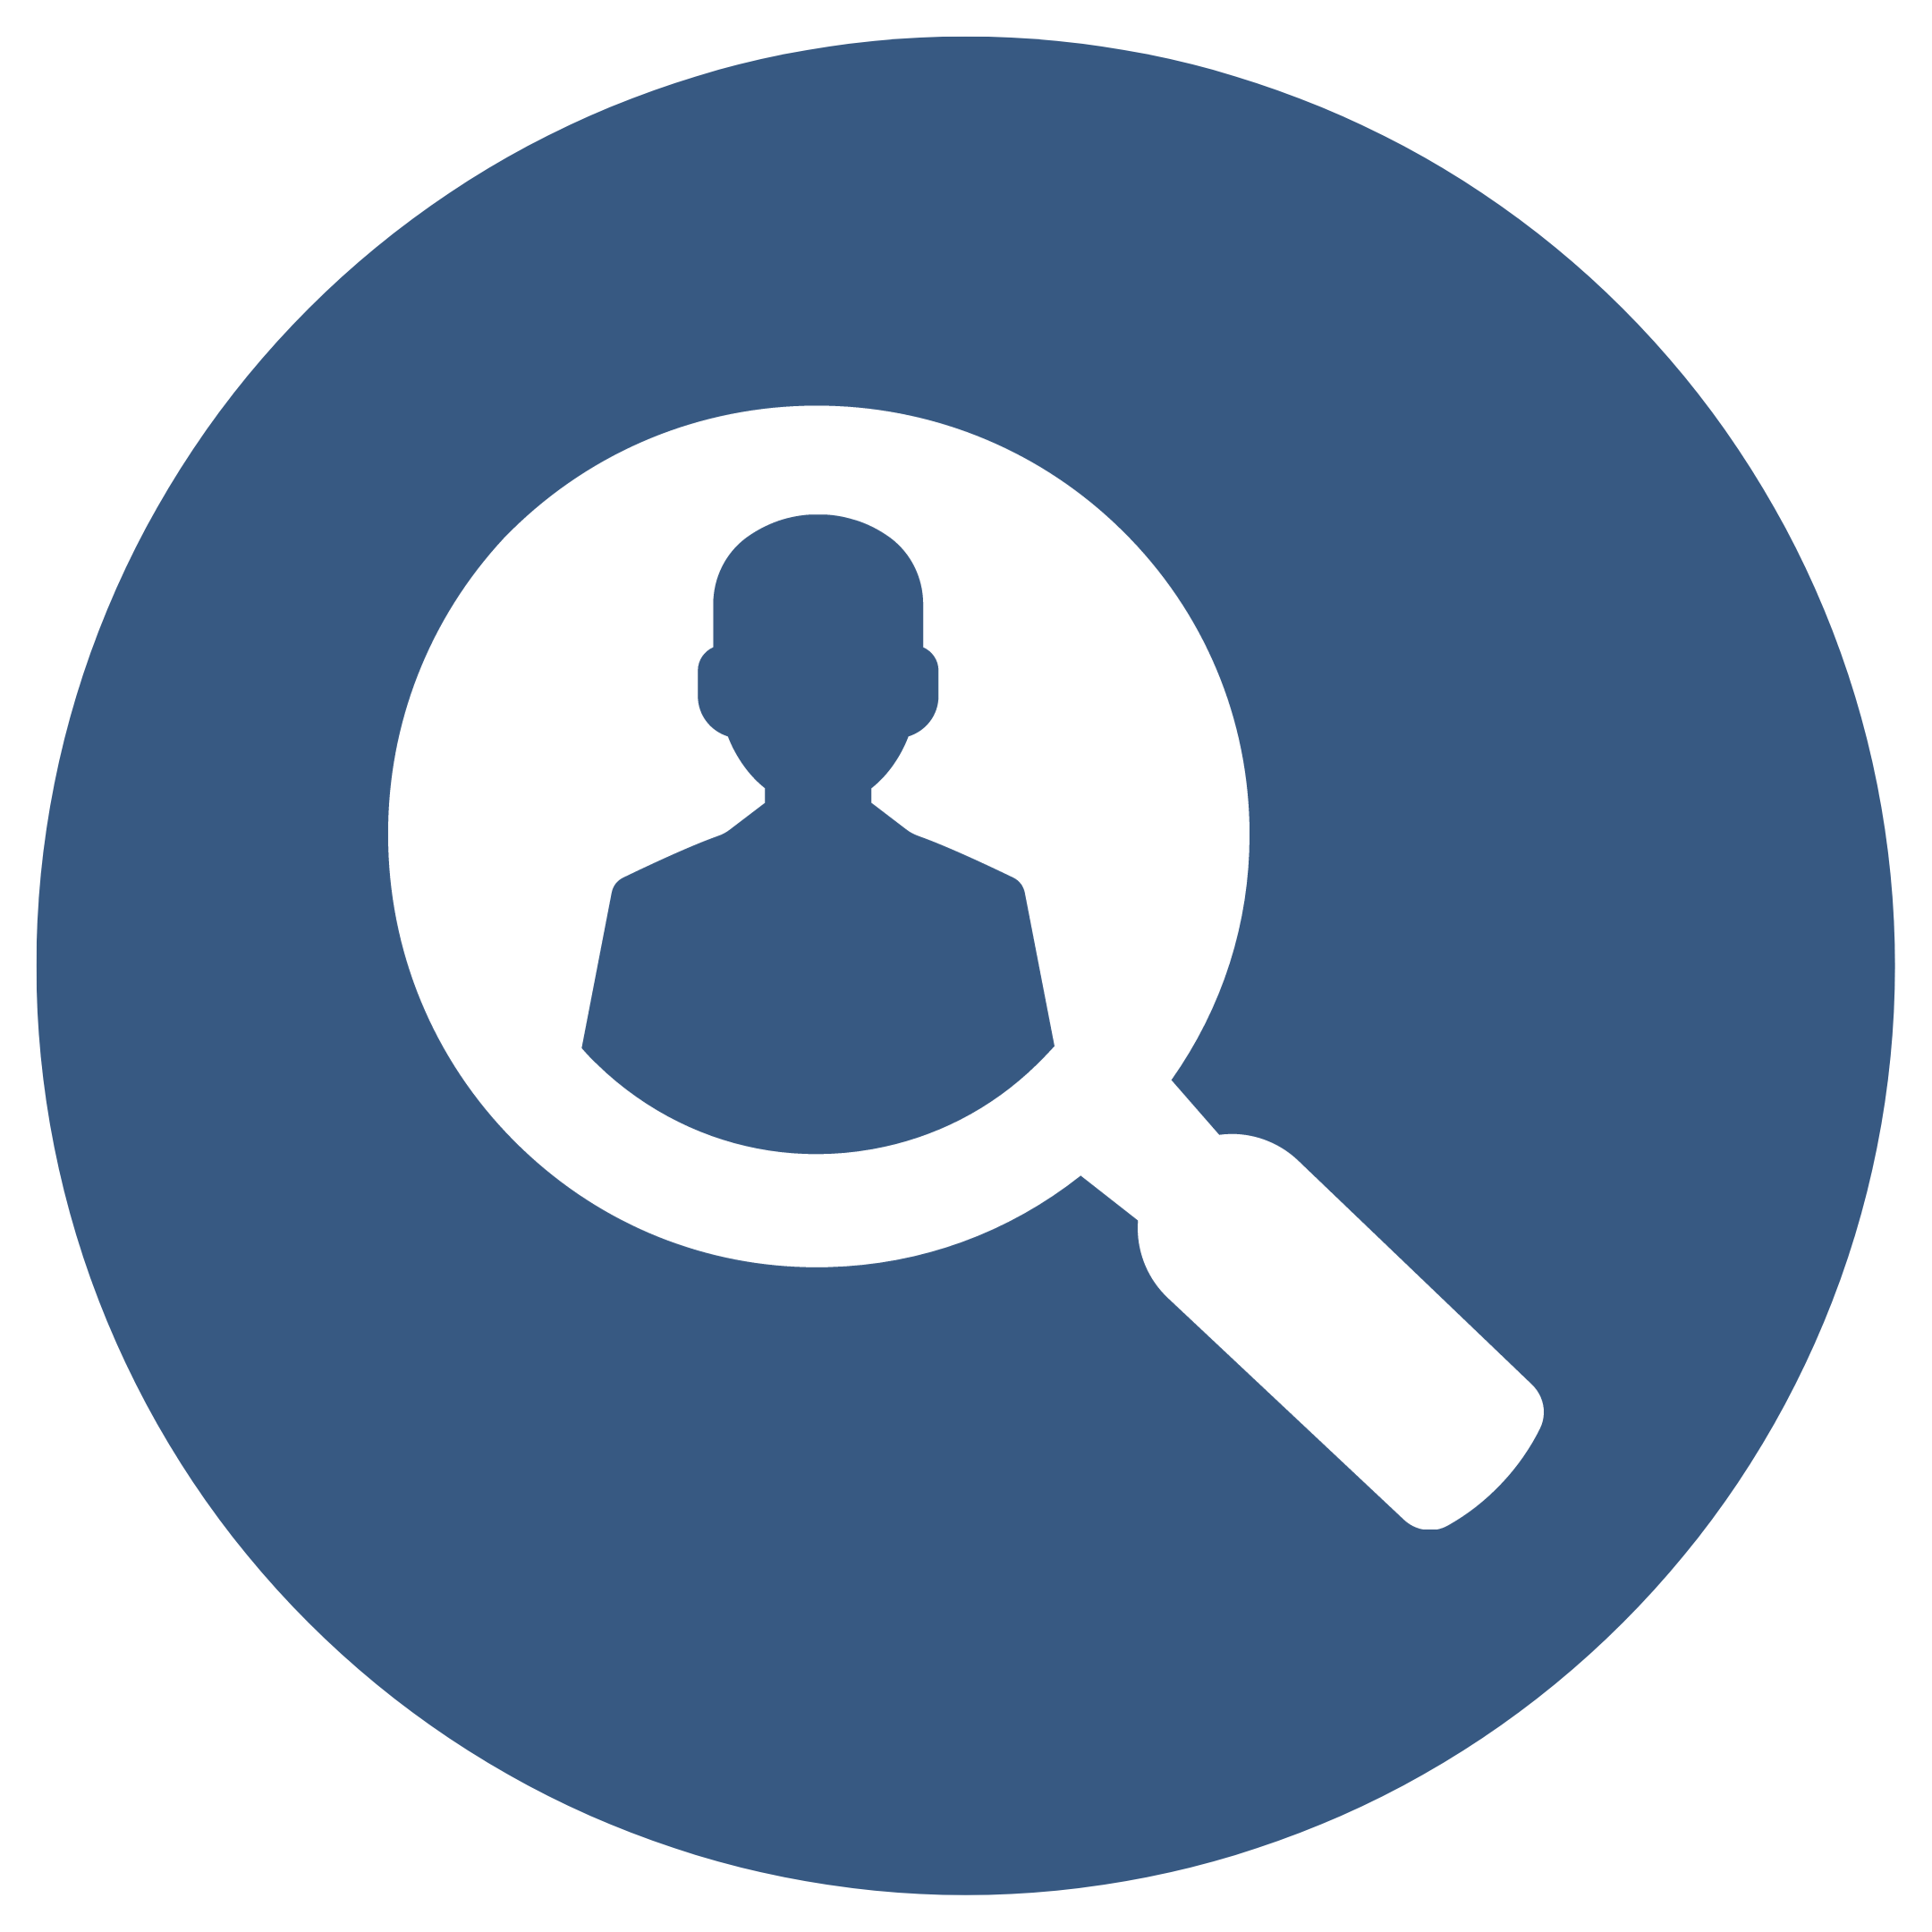 Candour Talent Recruitment Agency - About Us Page. Spotlighting Our Value: Noticeable. Featuring a Magnifying Glass with a Candidate, symbolizing our dedication to recognizing and amplifying the unique talents and skills of each individual we work with.